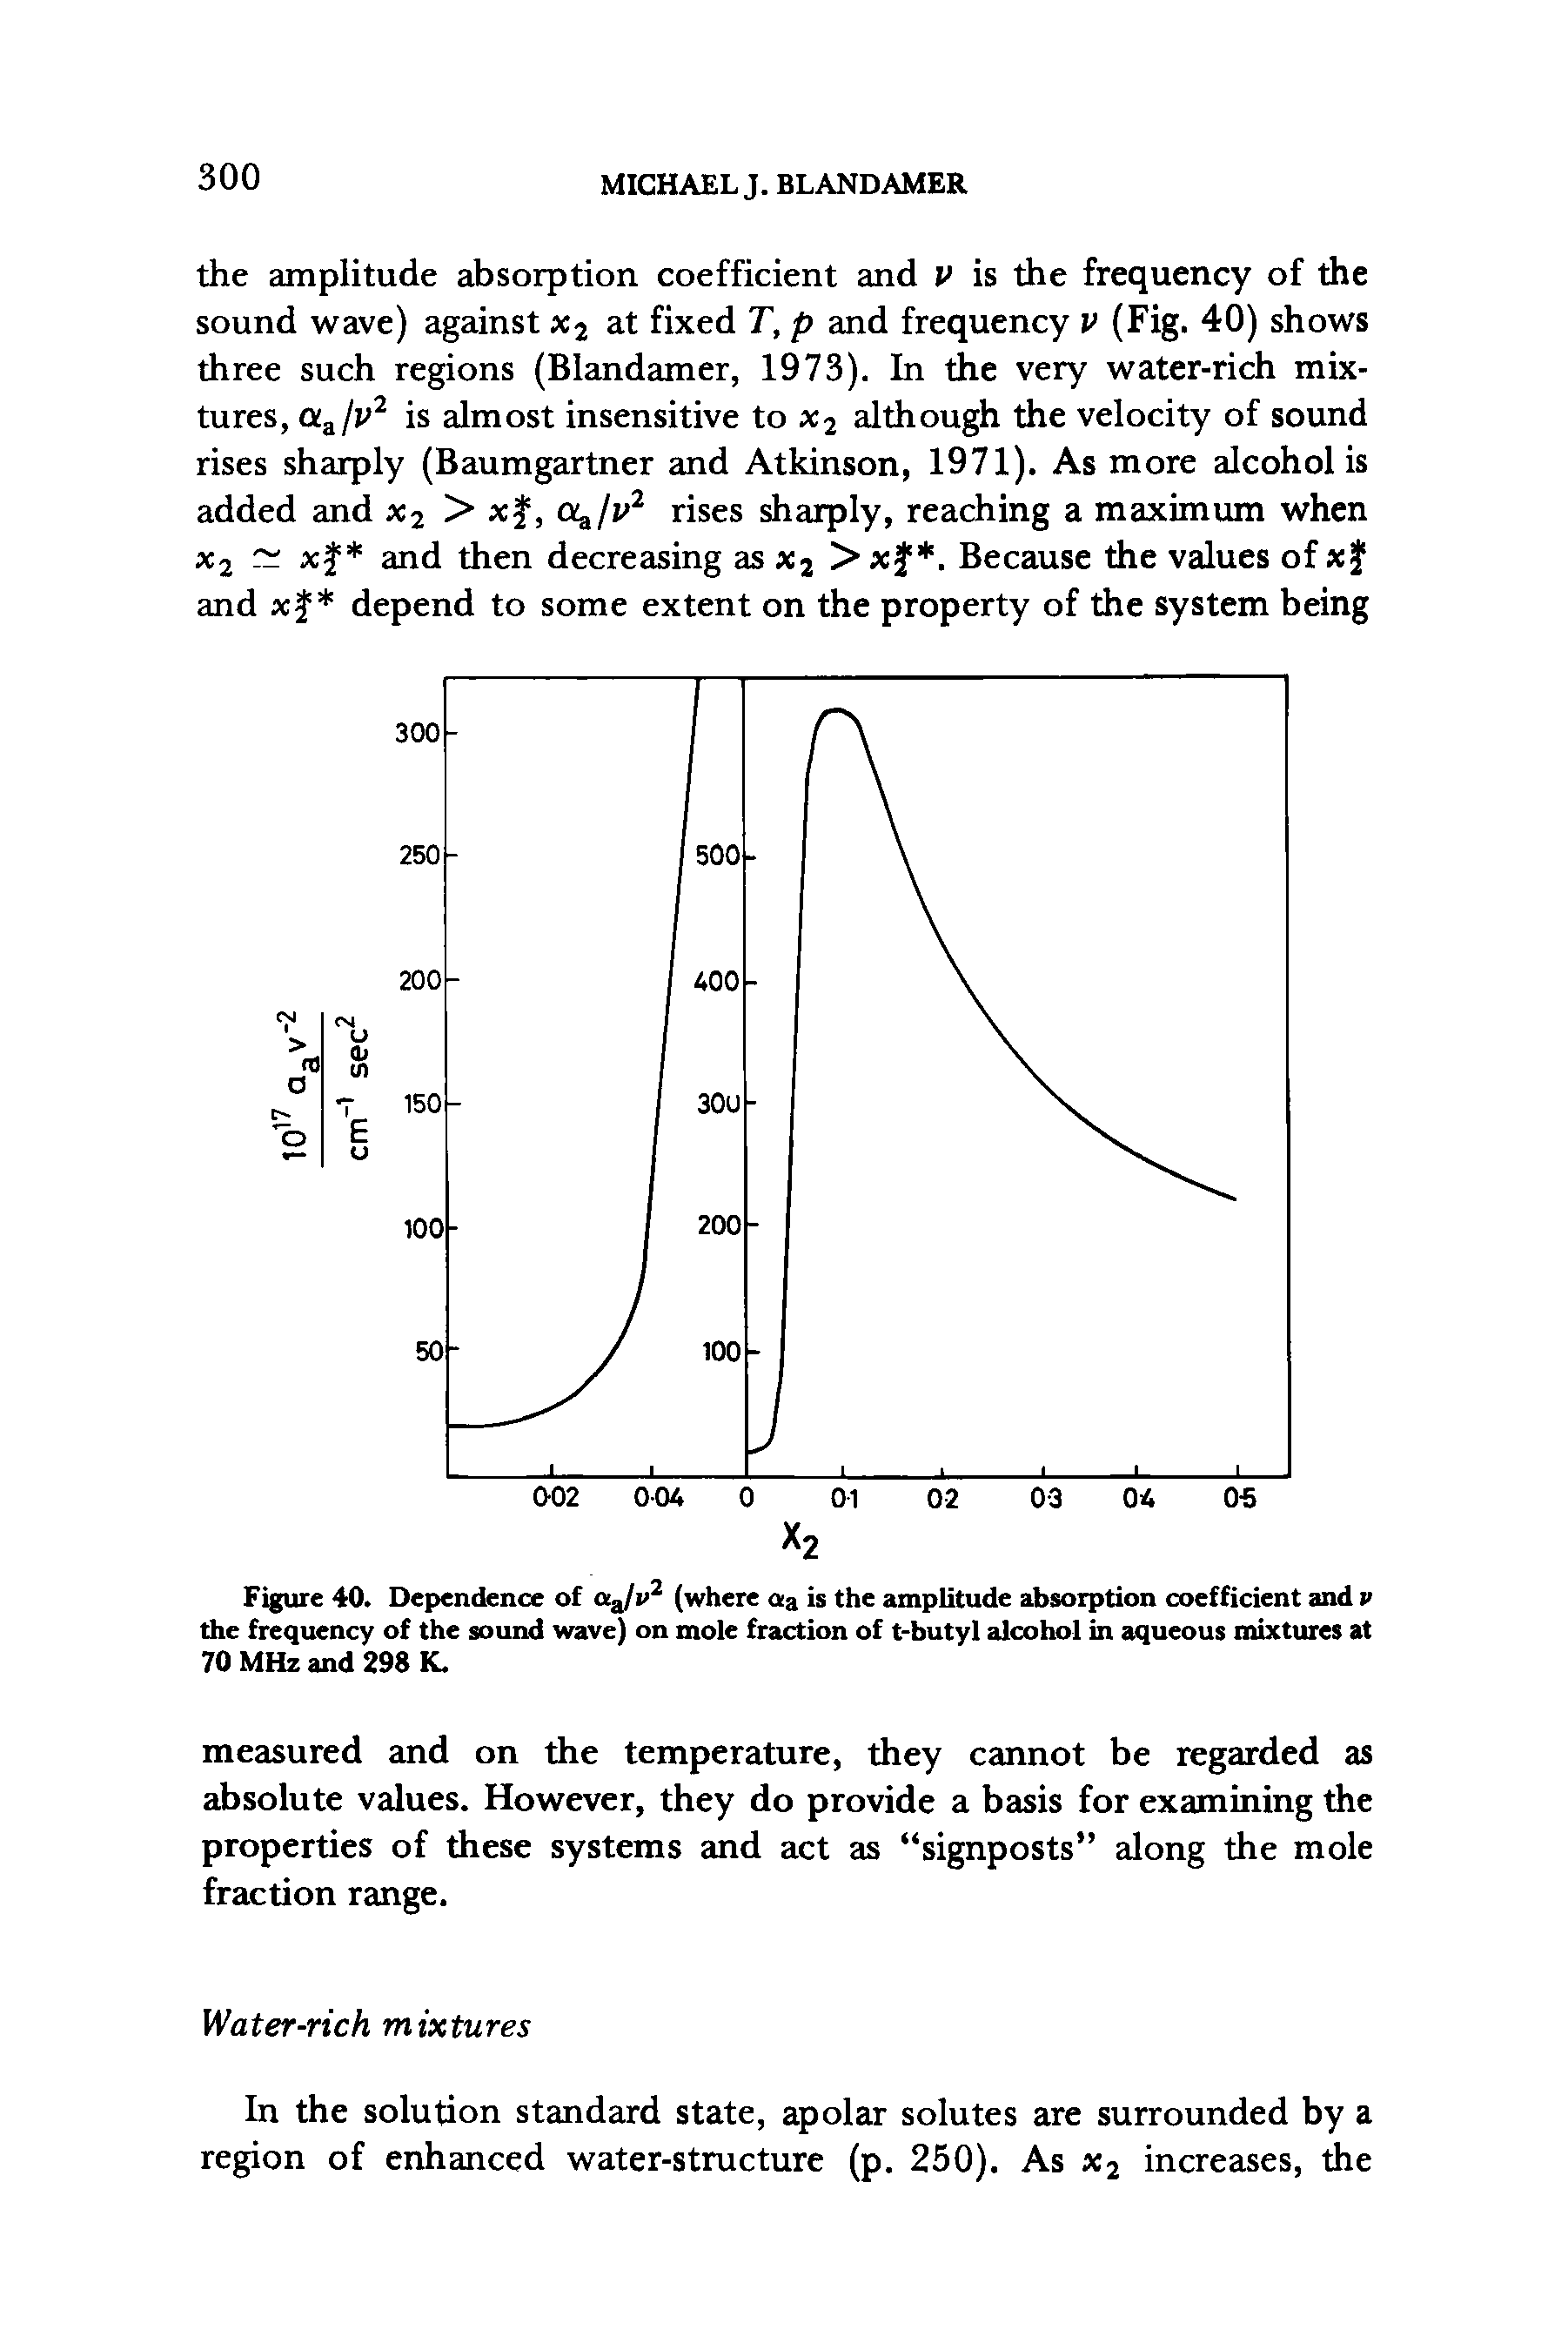 Figure 40. Dependence of ota/v2 (where aa is the amplitude absorption coefficient and v the frequency of the sound wave) on mole fraction of t-butyl alcohol in aqueous mixtures at 70 MHz and 298 K.